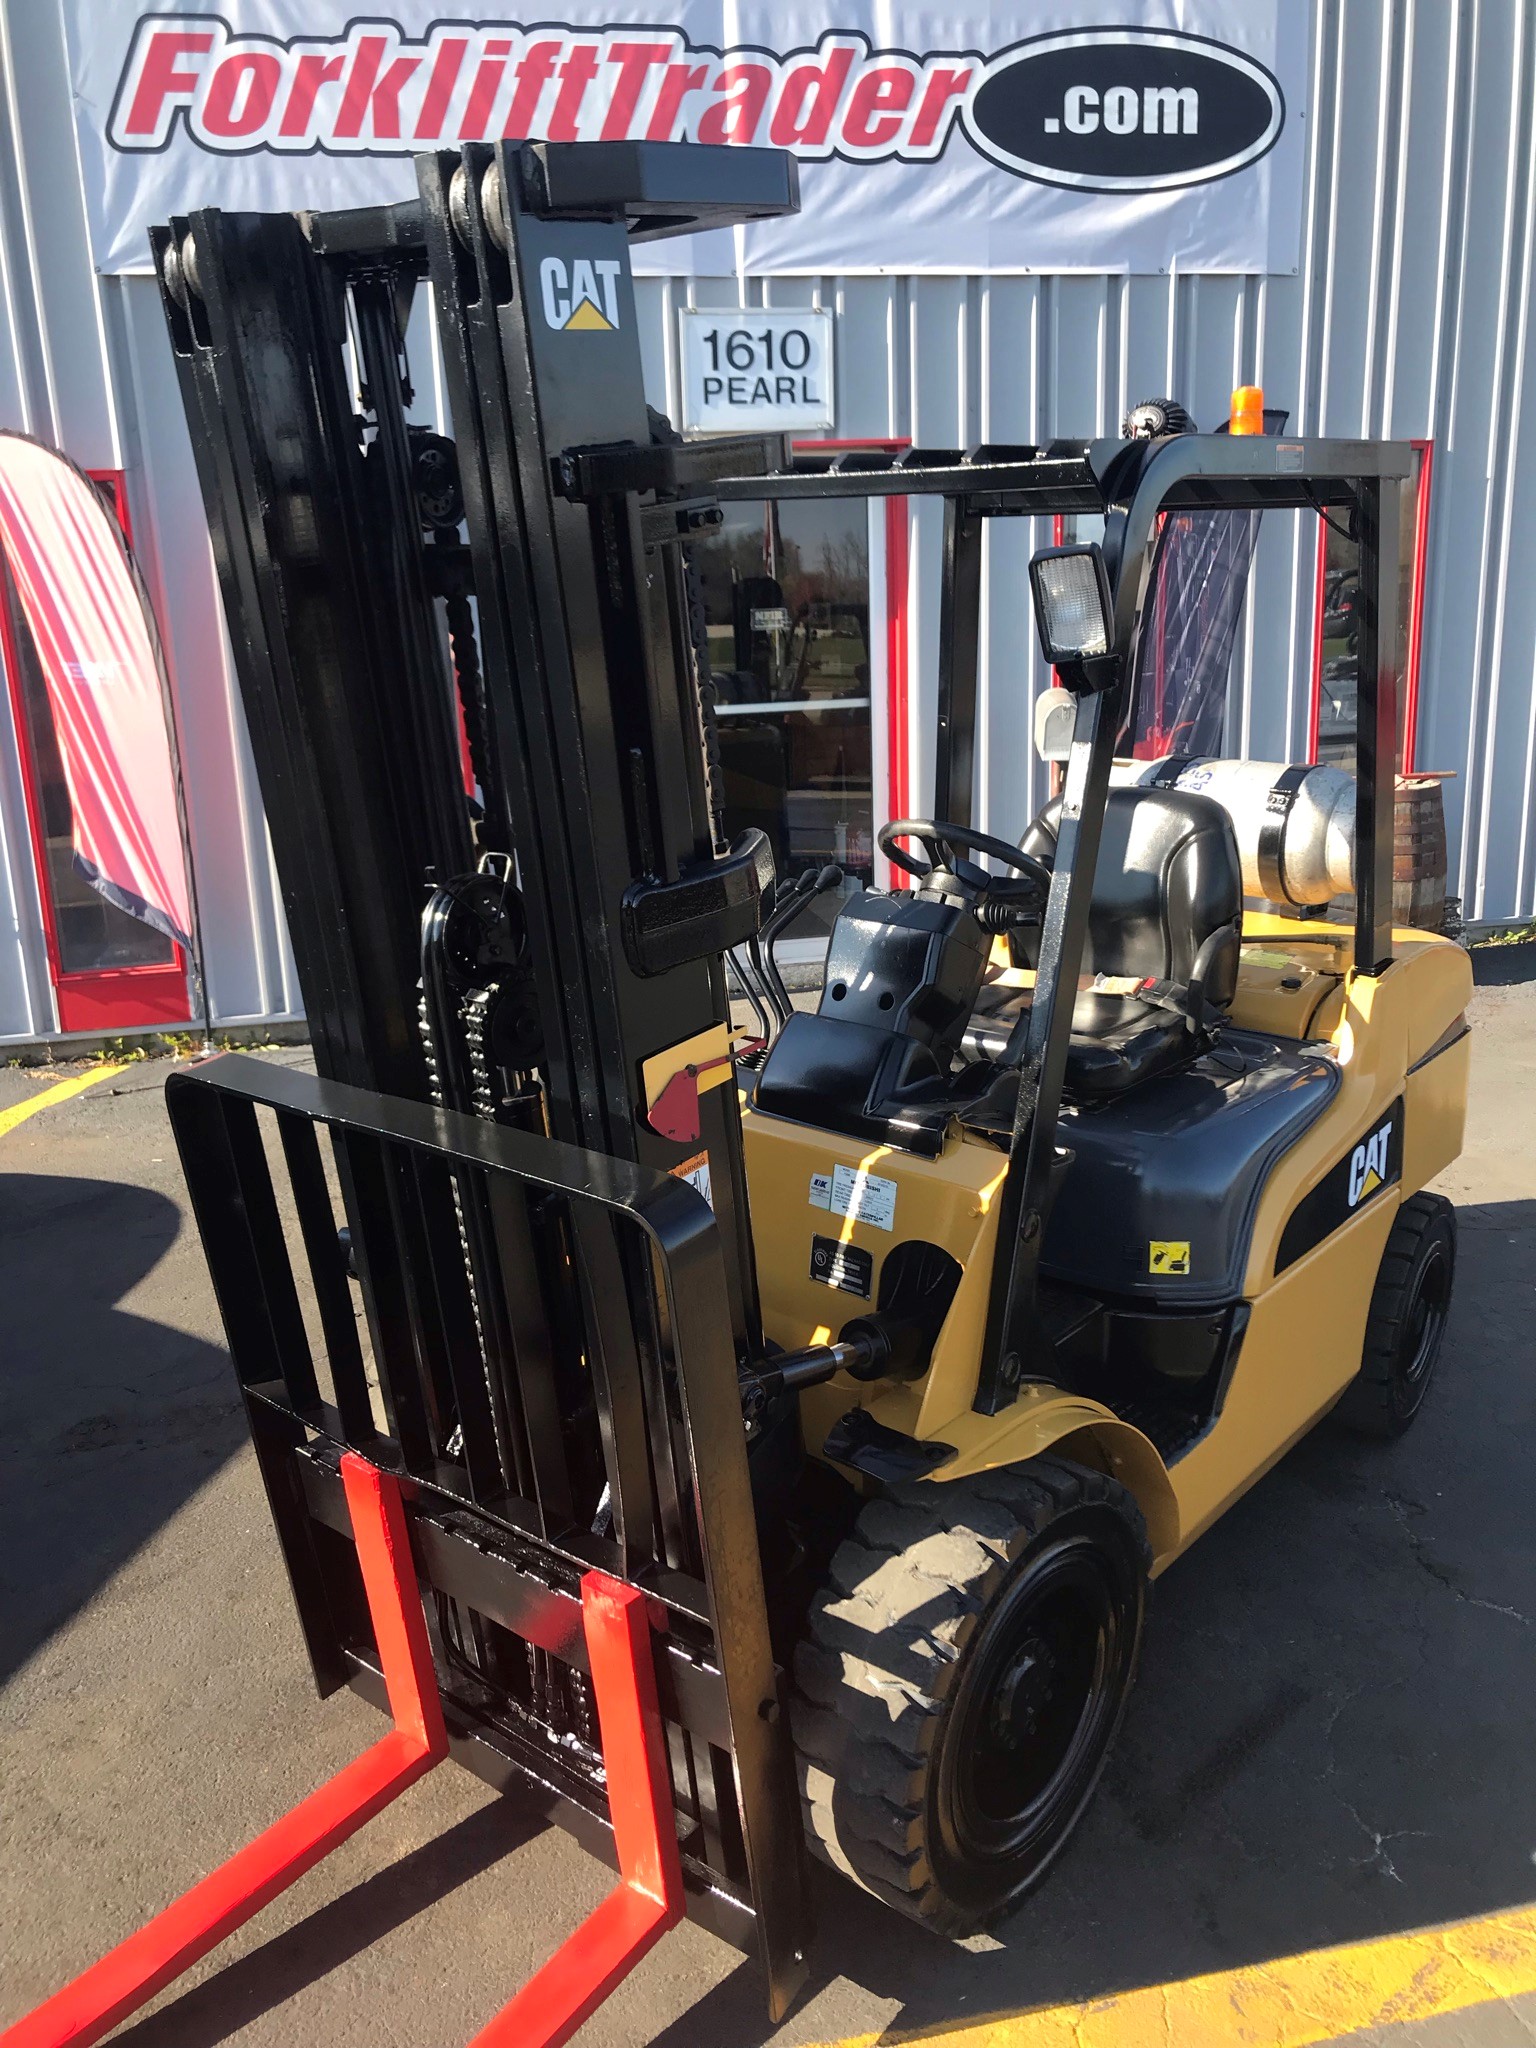 Yellow 2005 cat forklift with 42" forks for sale